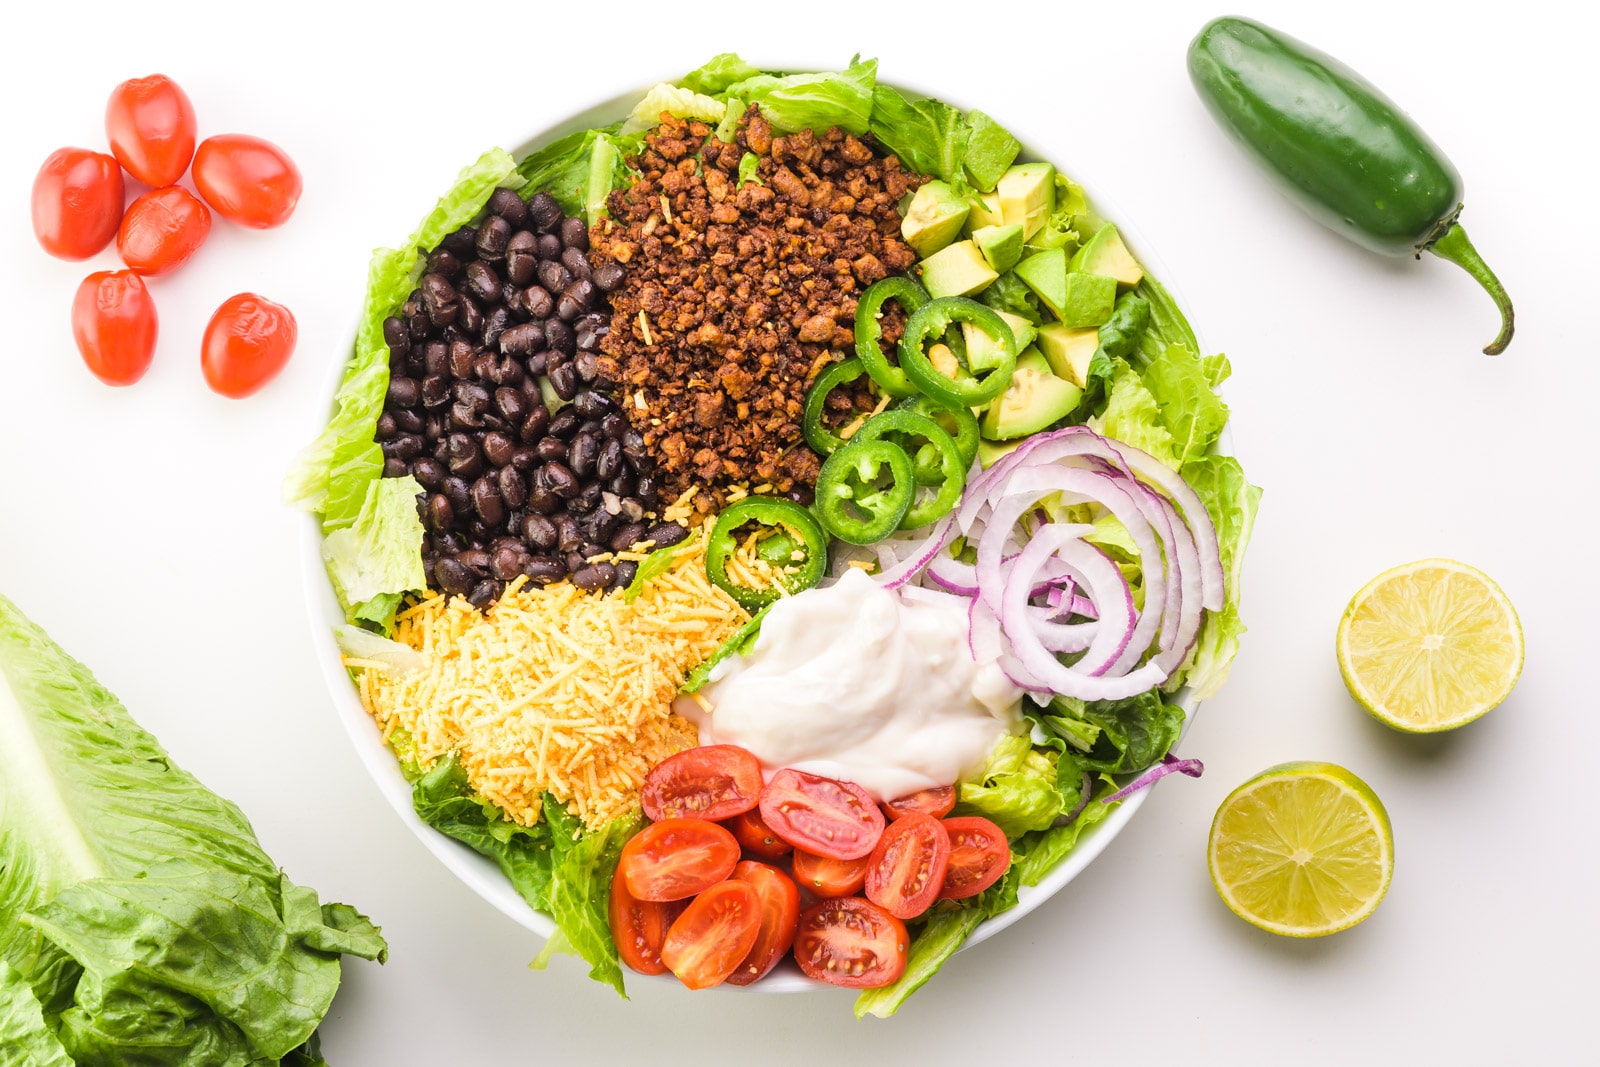 Looking down on a taco salad with lots of veggie toppings, such as red onions, cherry tomatoes, and more. There are sliced limes, a jalapeño, red cherry tomatoes, and more lettuce situated around the bowl.